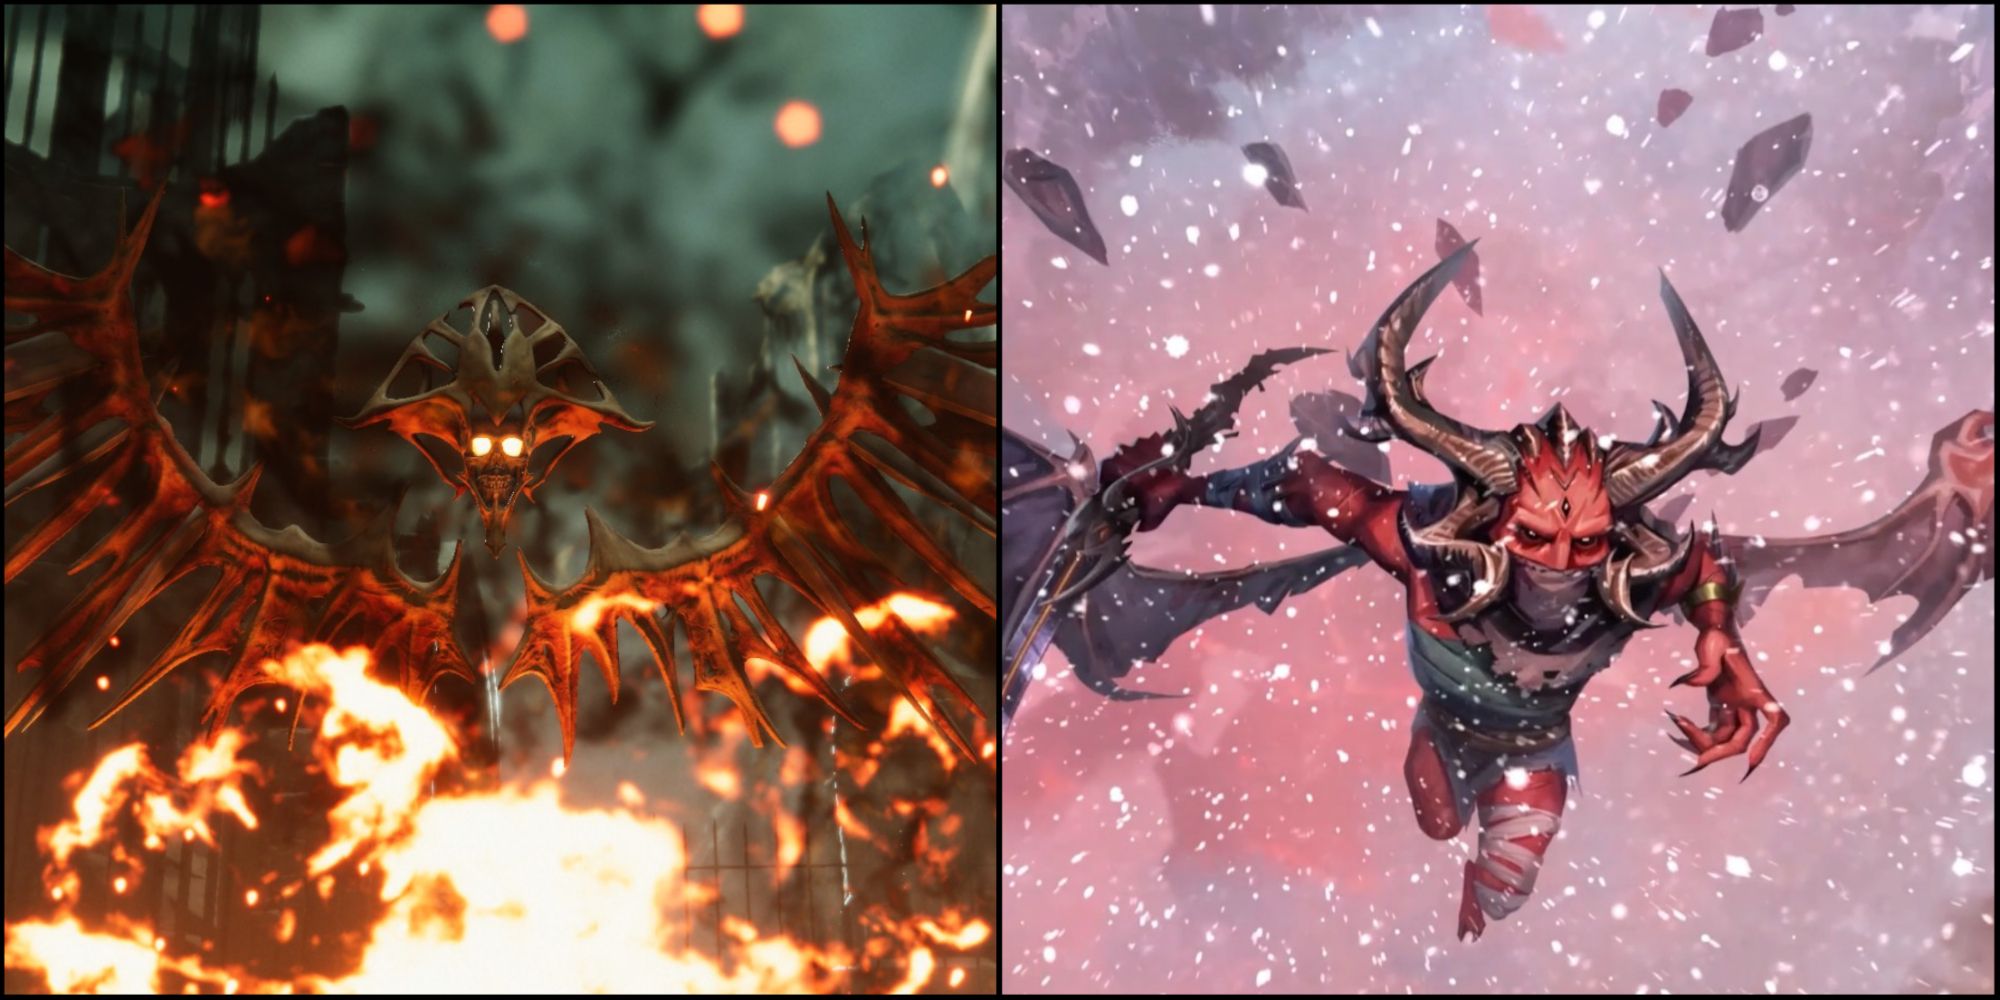 Voke's Red Judge Aspect on the left and the protagonist flying on the right.